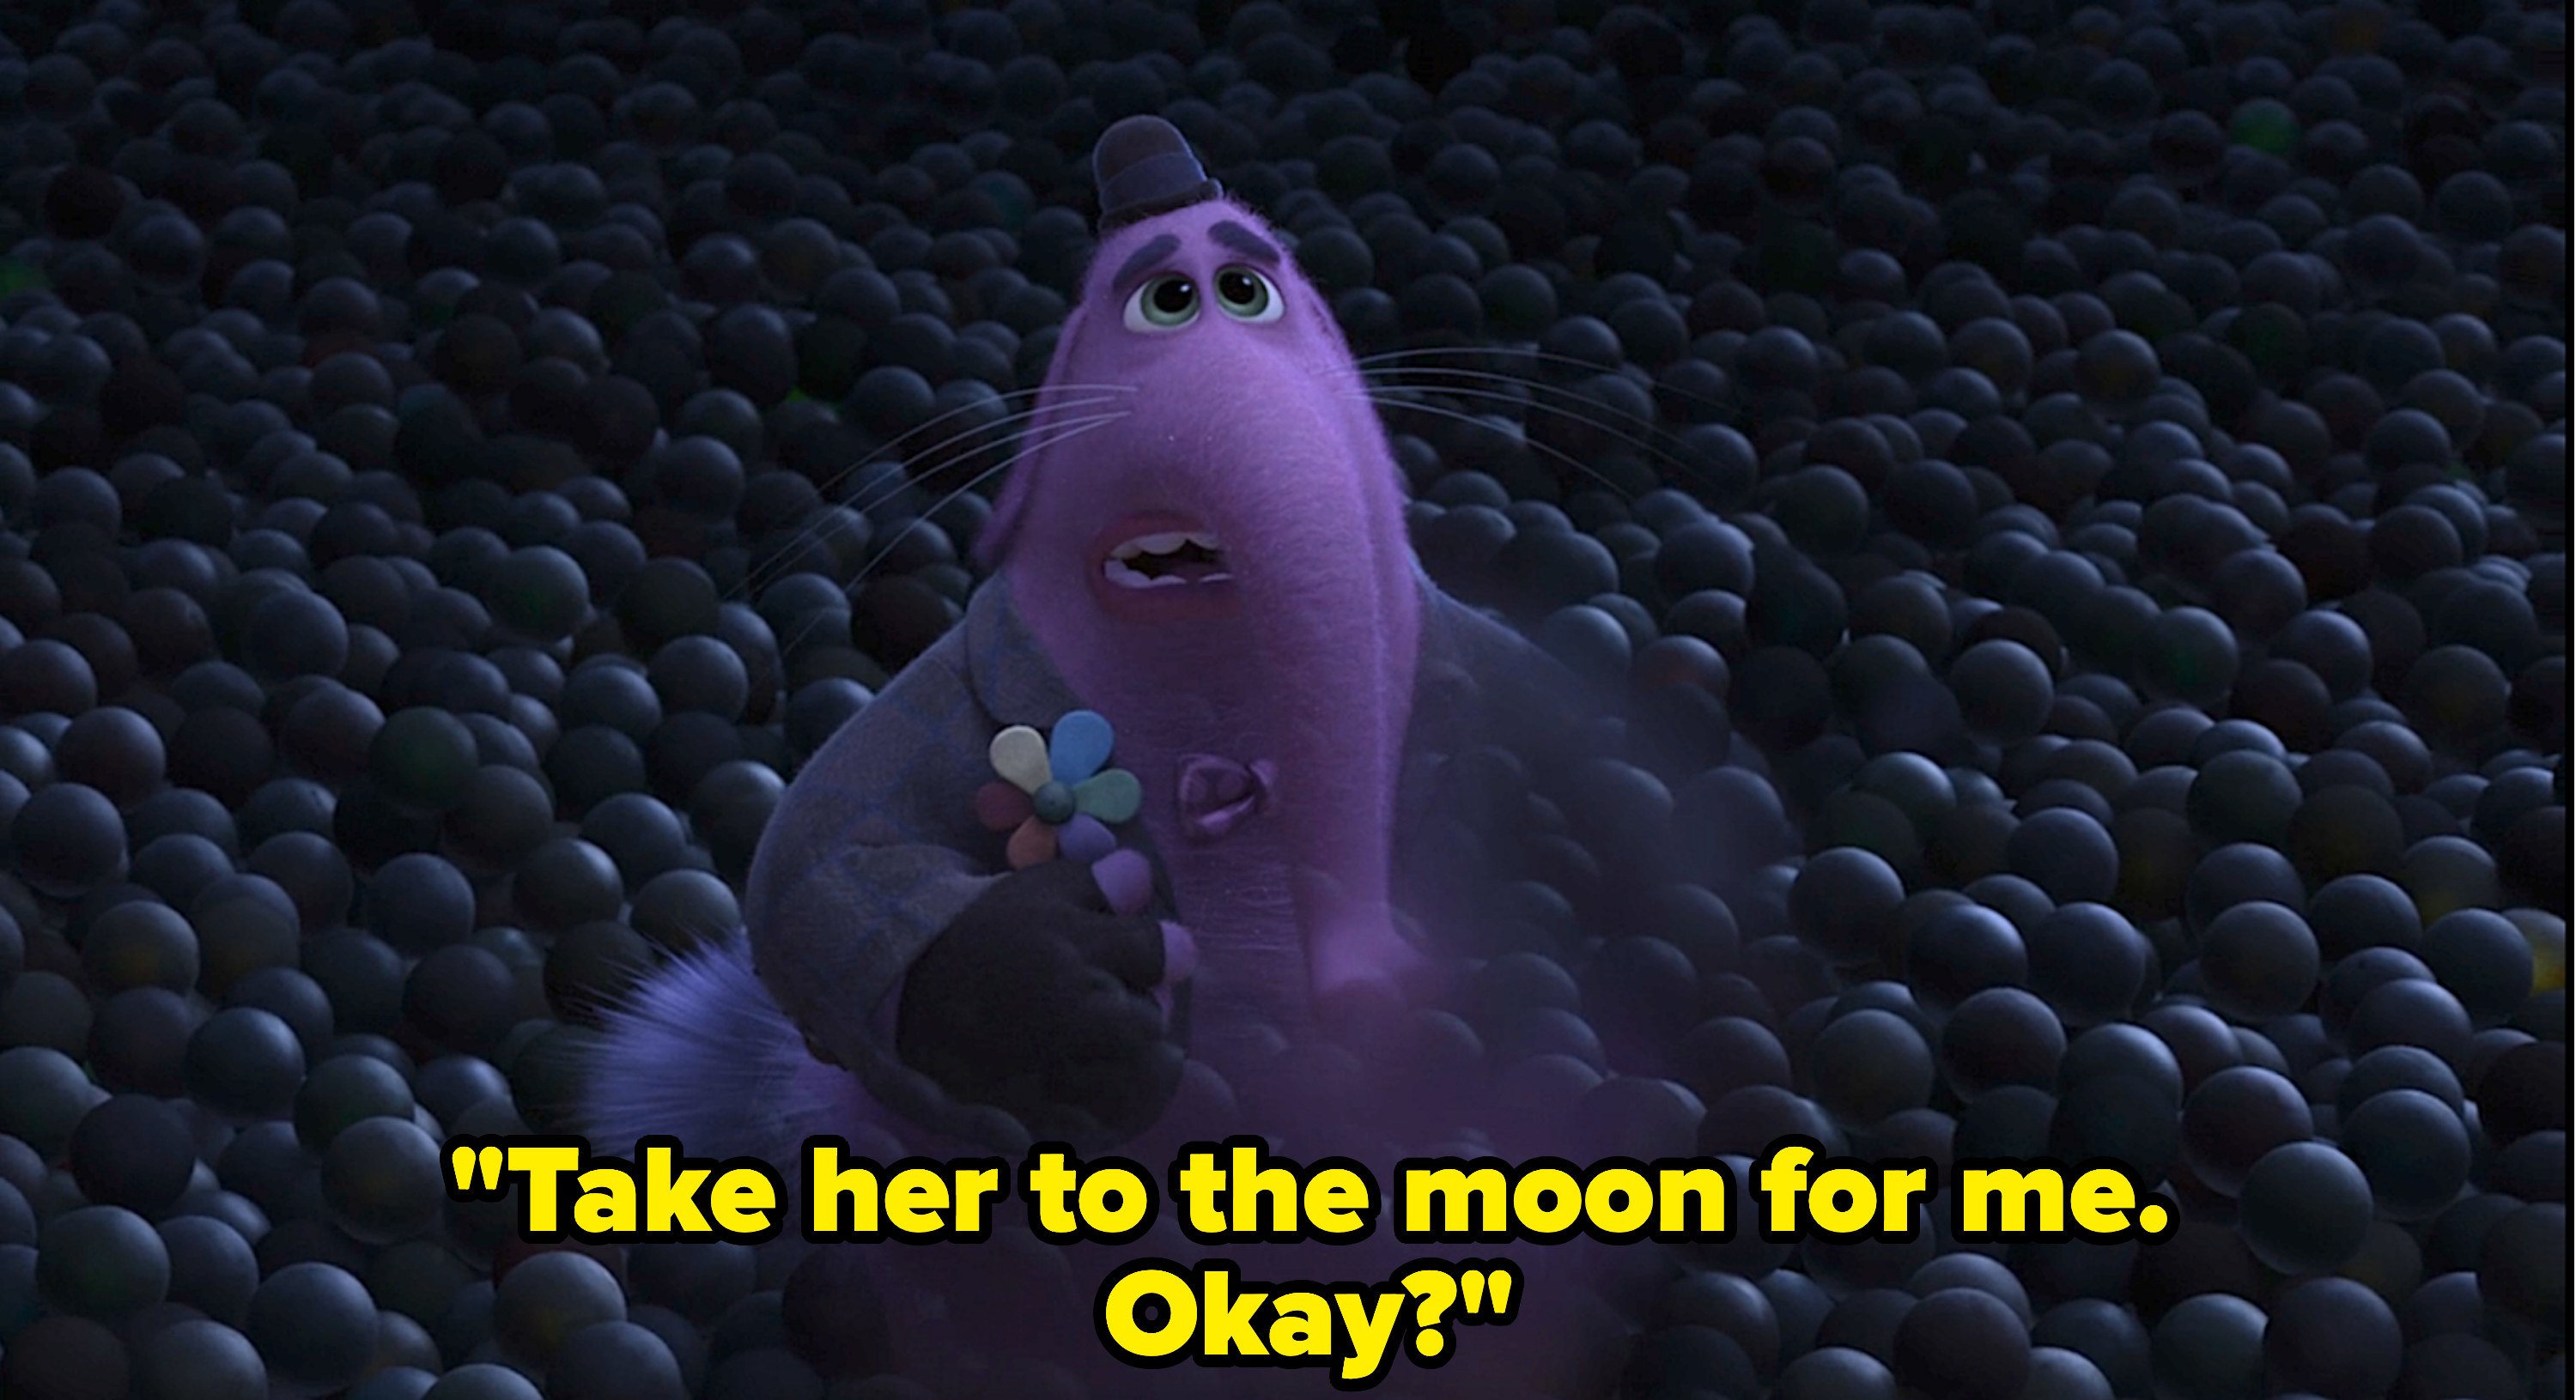 &quot;Take her to the moon for me. Okay?&quot;